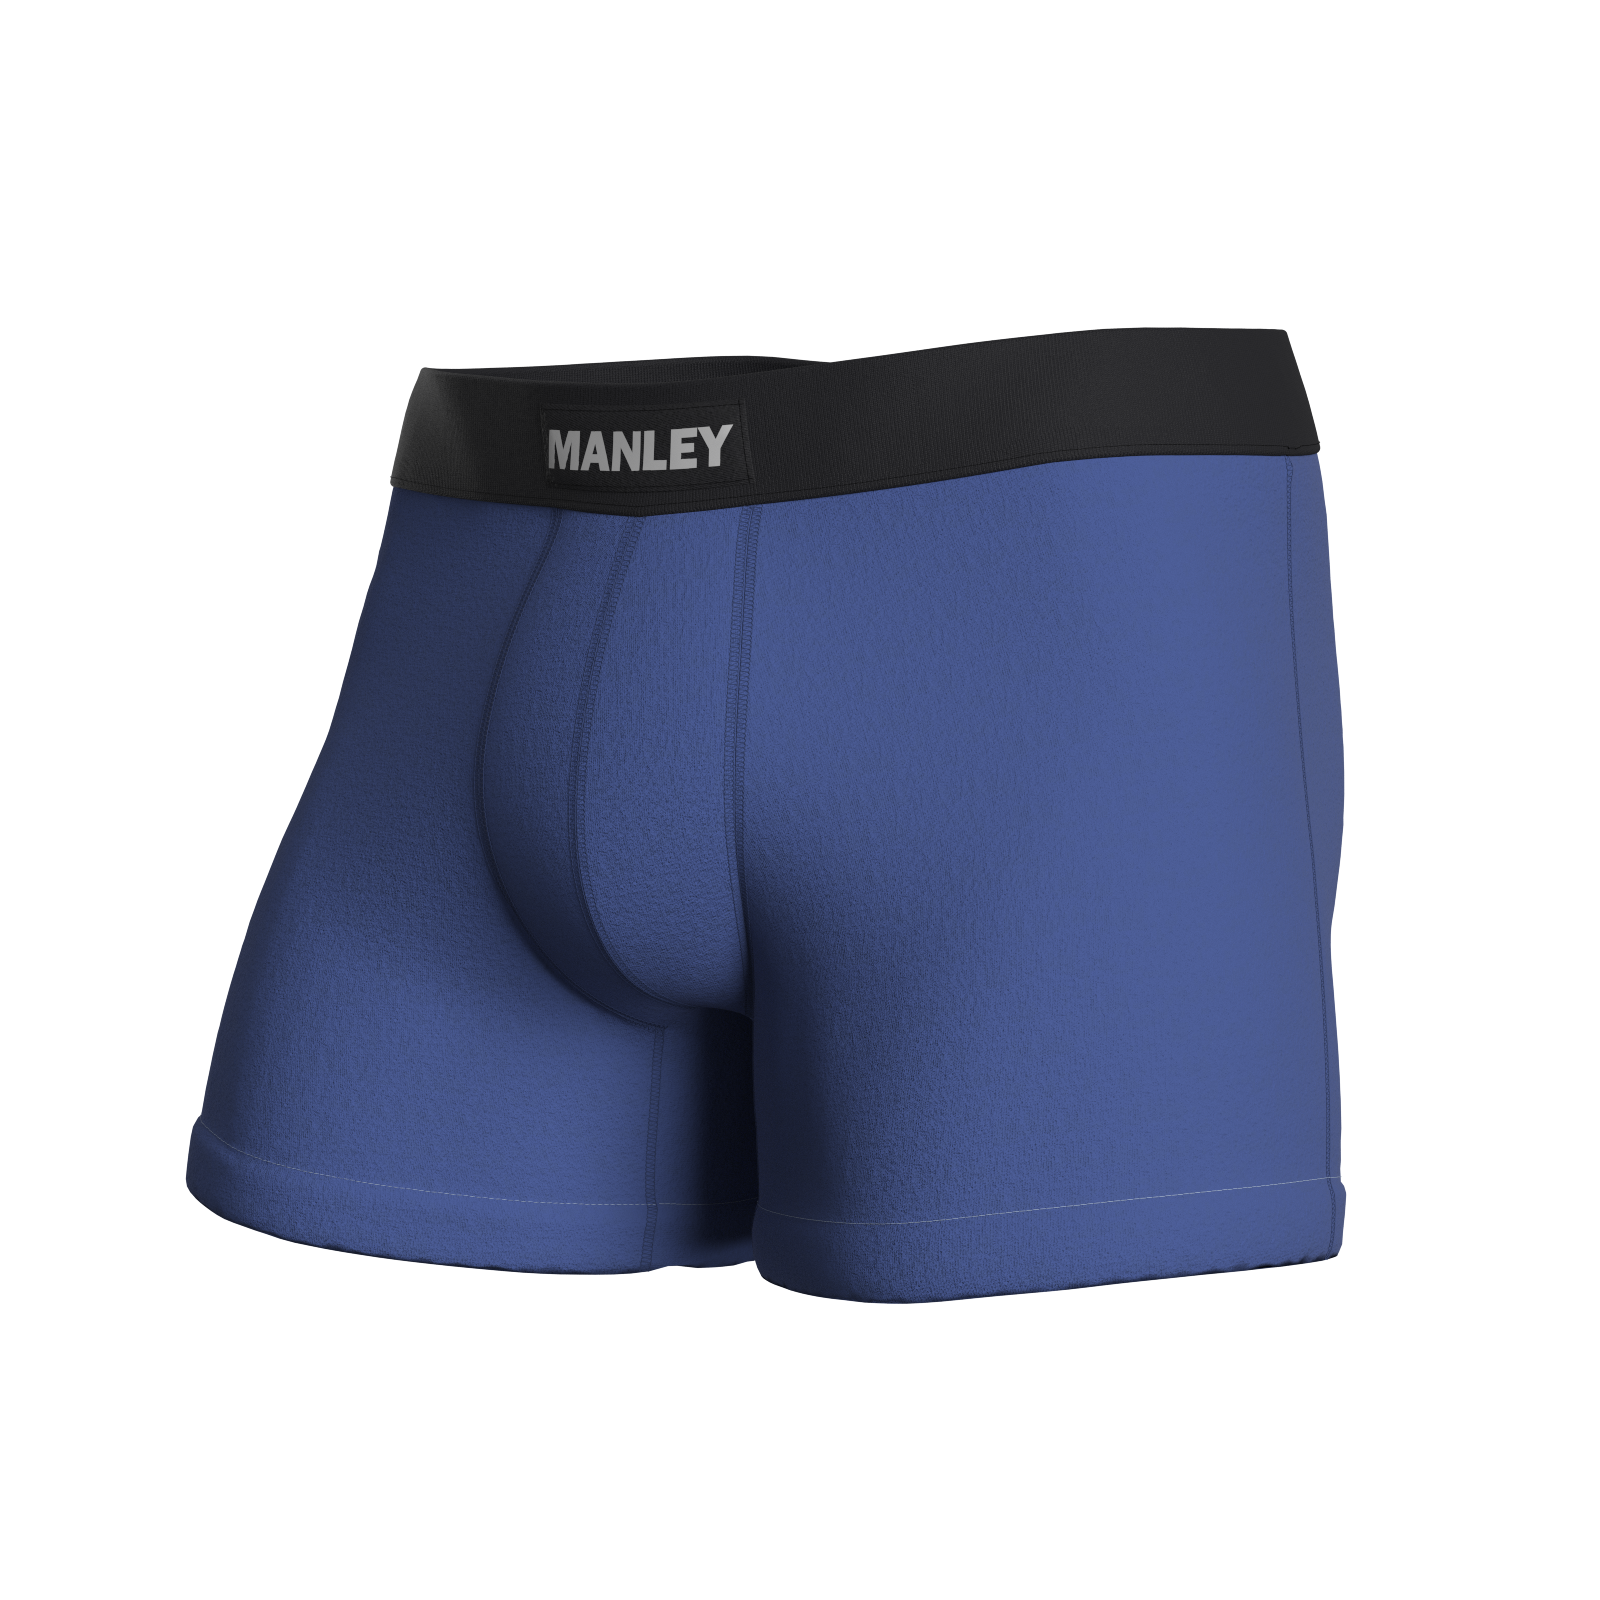 Underwear that Stops the Pee Spot  In The Navy – Manley Barrier Apparel